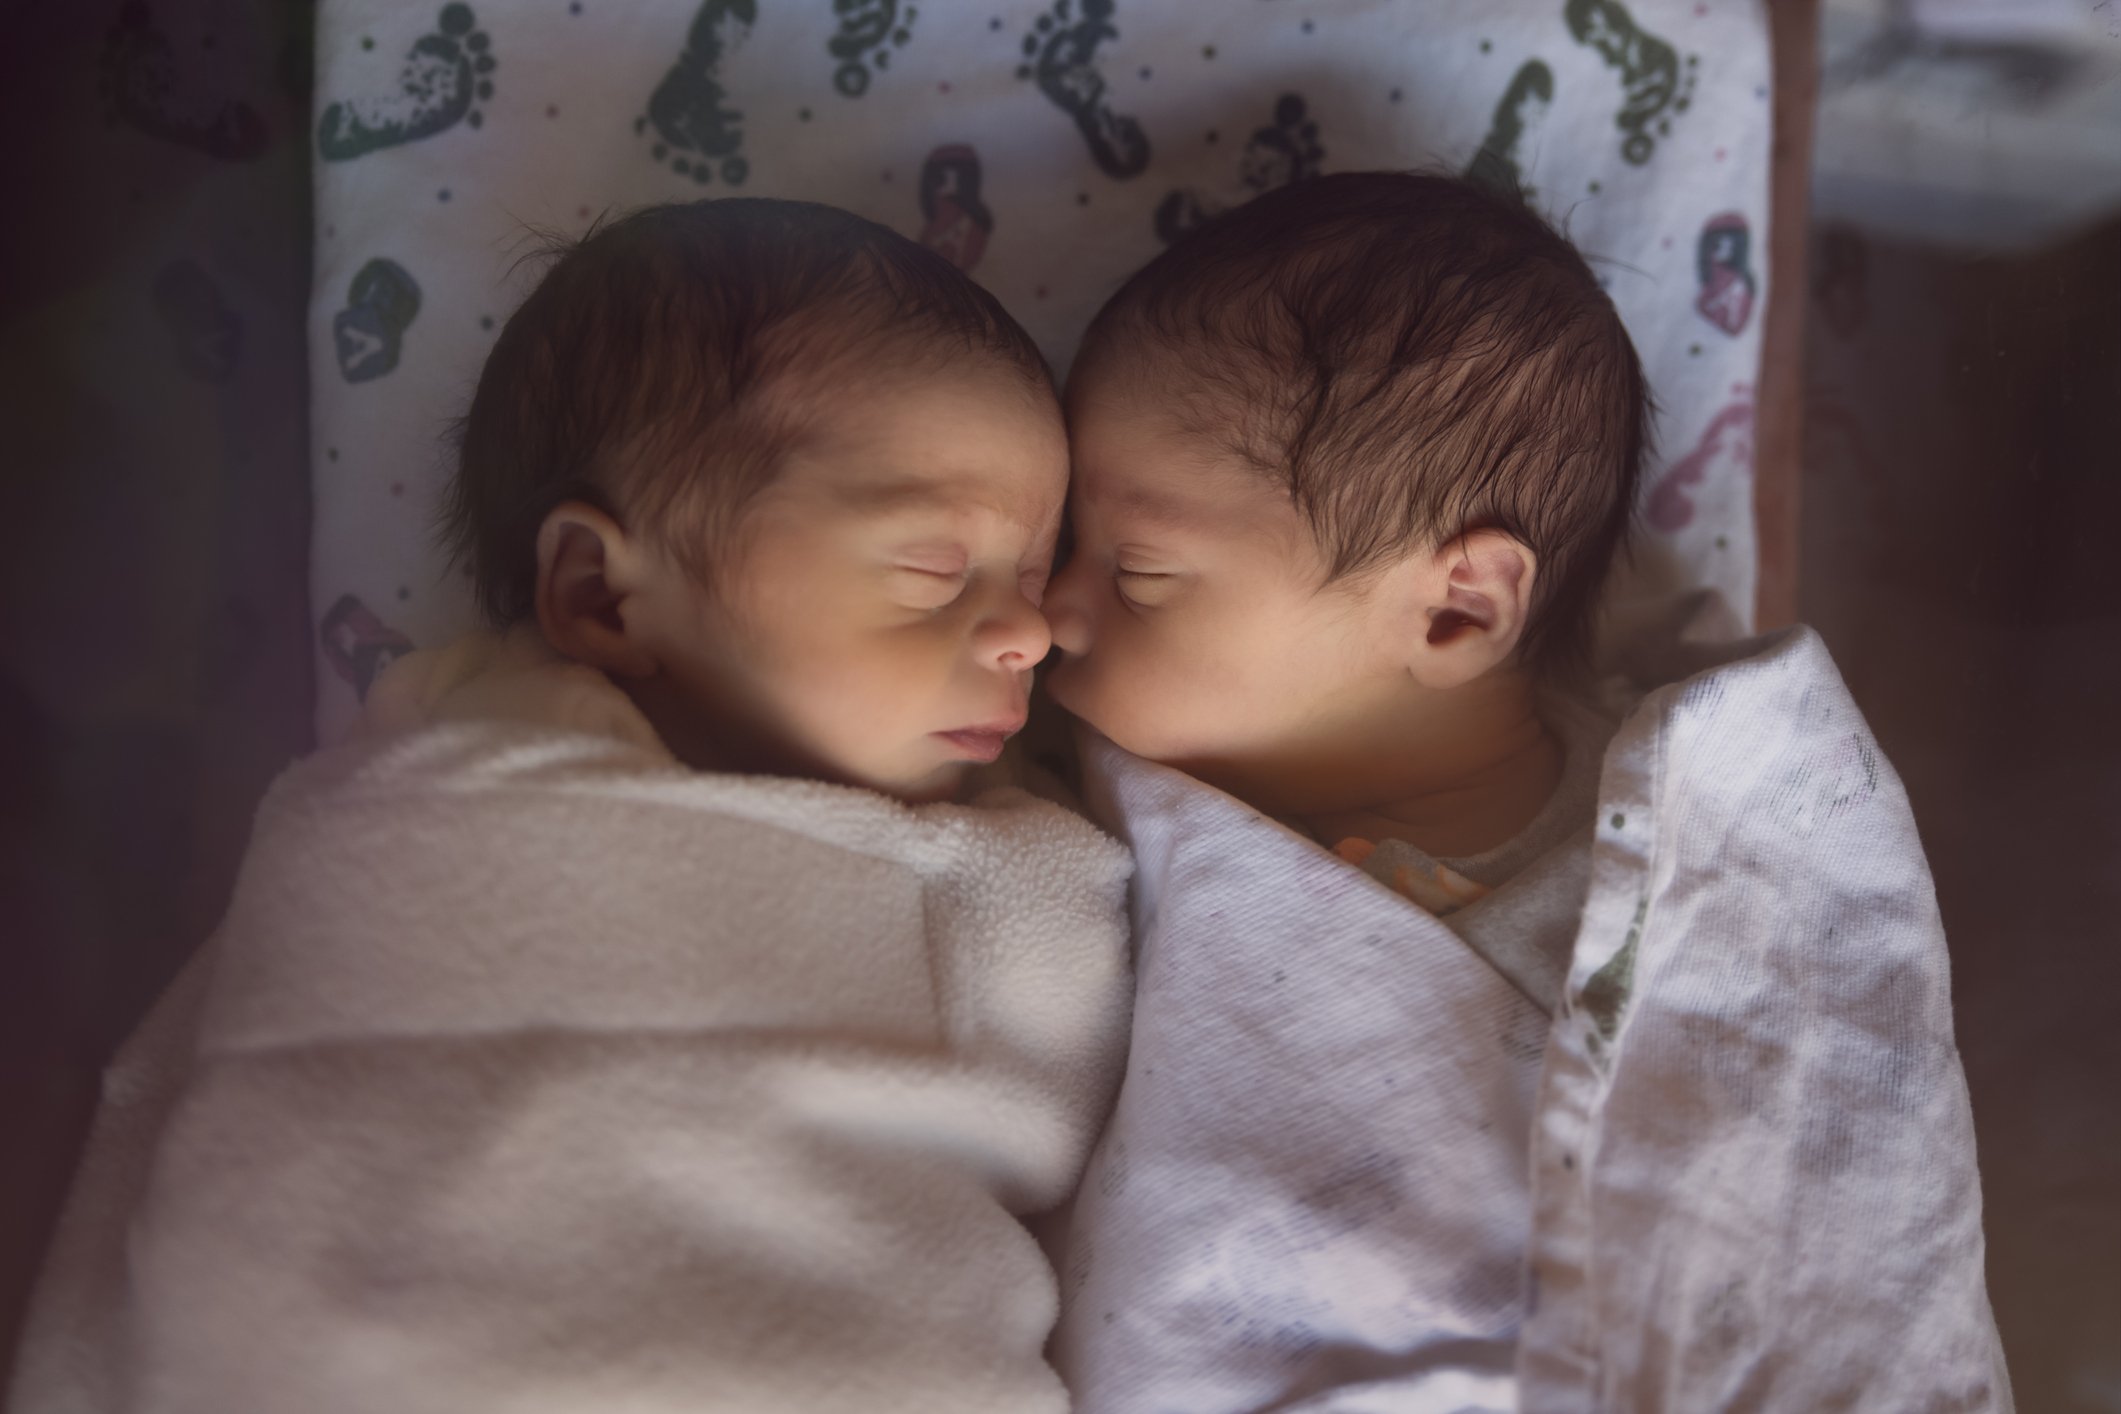 Premature Newborn Fraternal Twins in Hospital Sleep Together in Plastic Crib | Photo: Getty Images